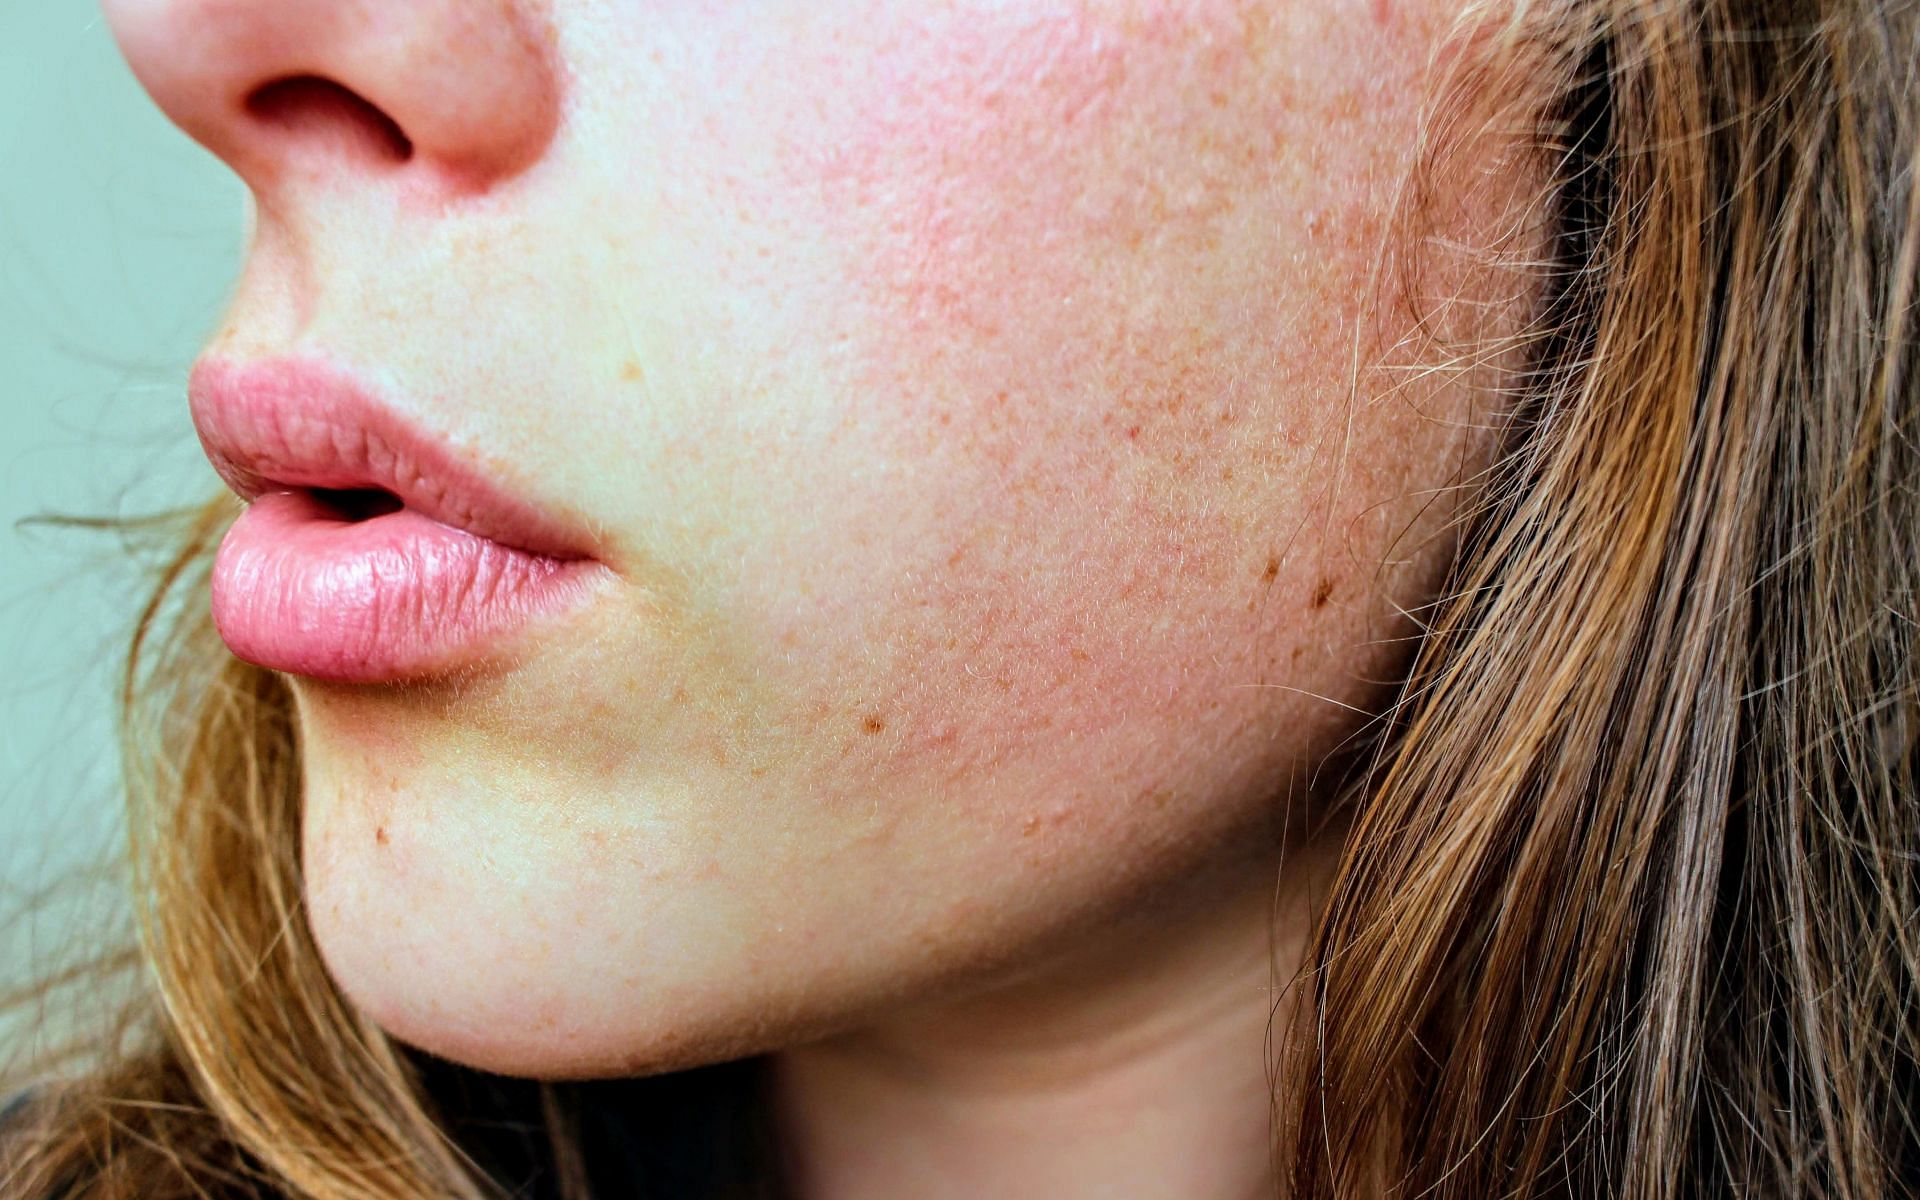 Consequences of not wearing sunscreen (image sourced via Pexels / Photo by Jenna Hamra)